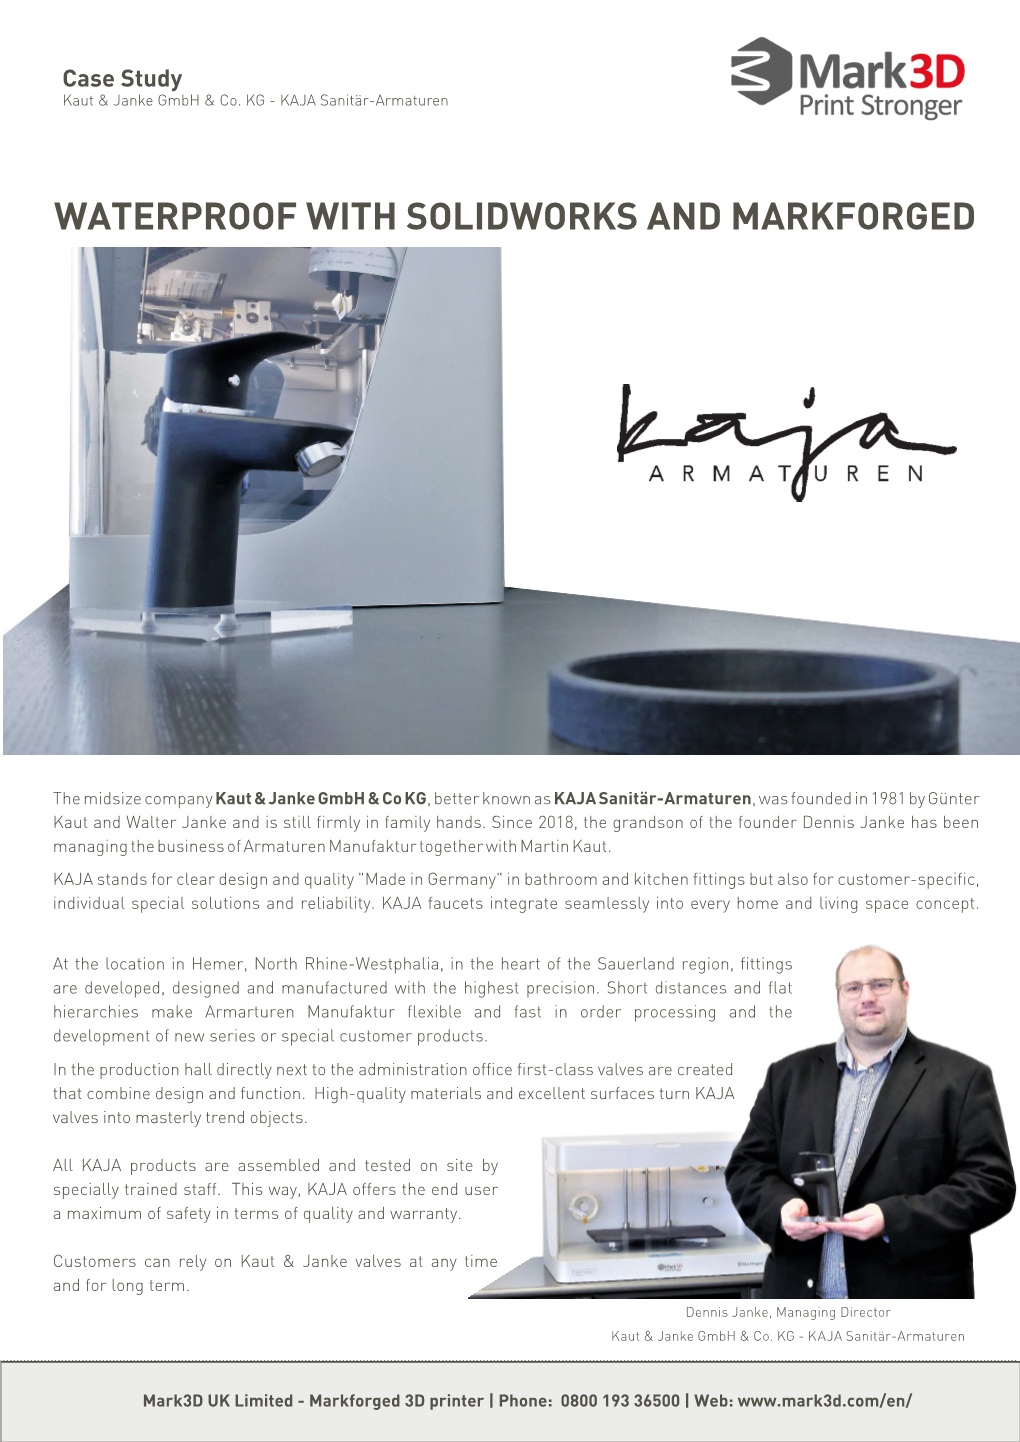 Waterproof with Solidworks and Markforged